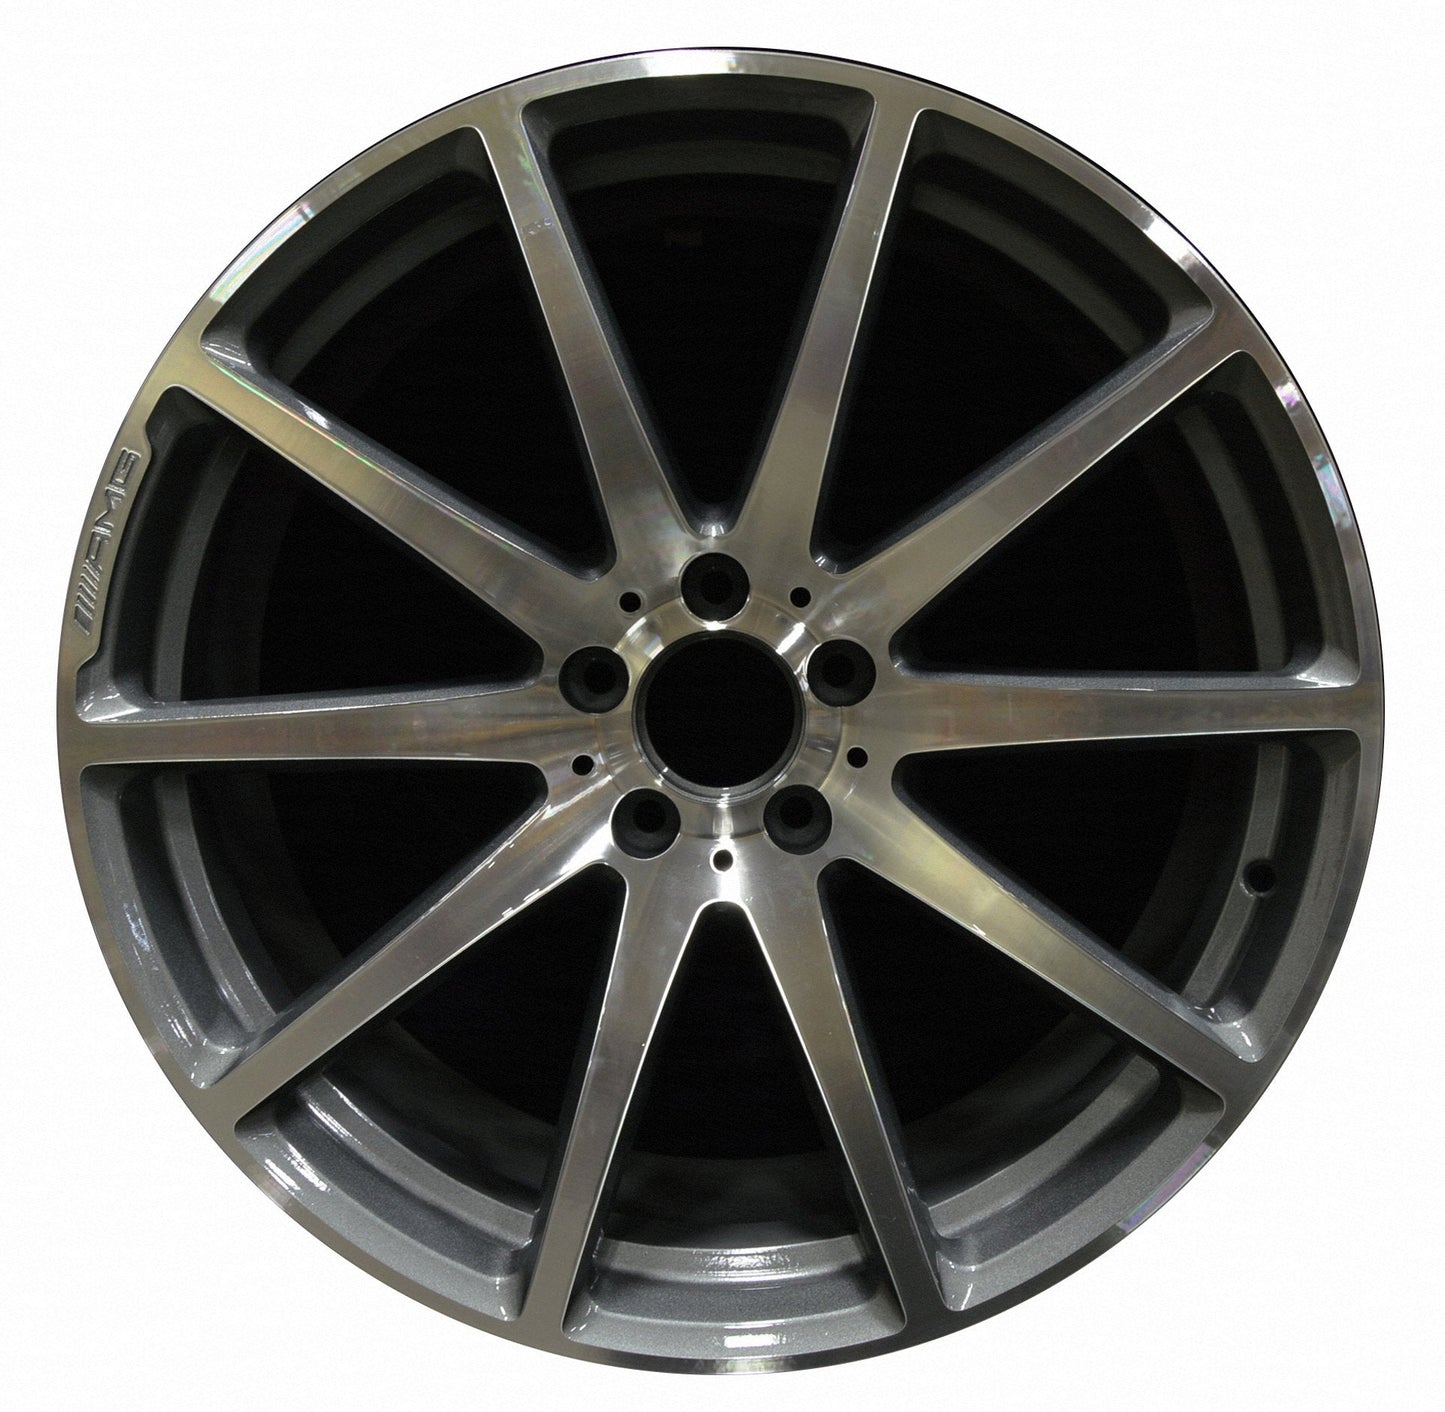 Mercedes SL65  2013, 2014, 2015, 2016, 2017, 2018 Factory OEM Car Wheel Size 20x10 Alloy WAO.85381RE.LC98.MABRT